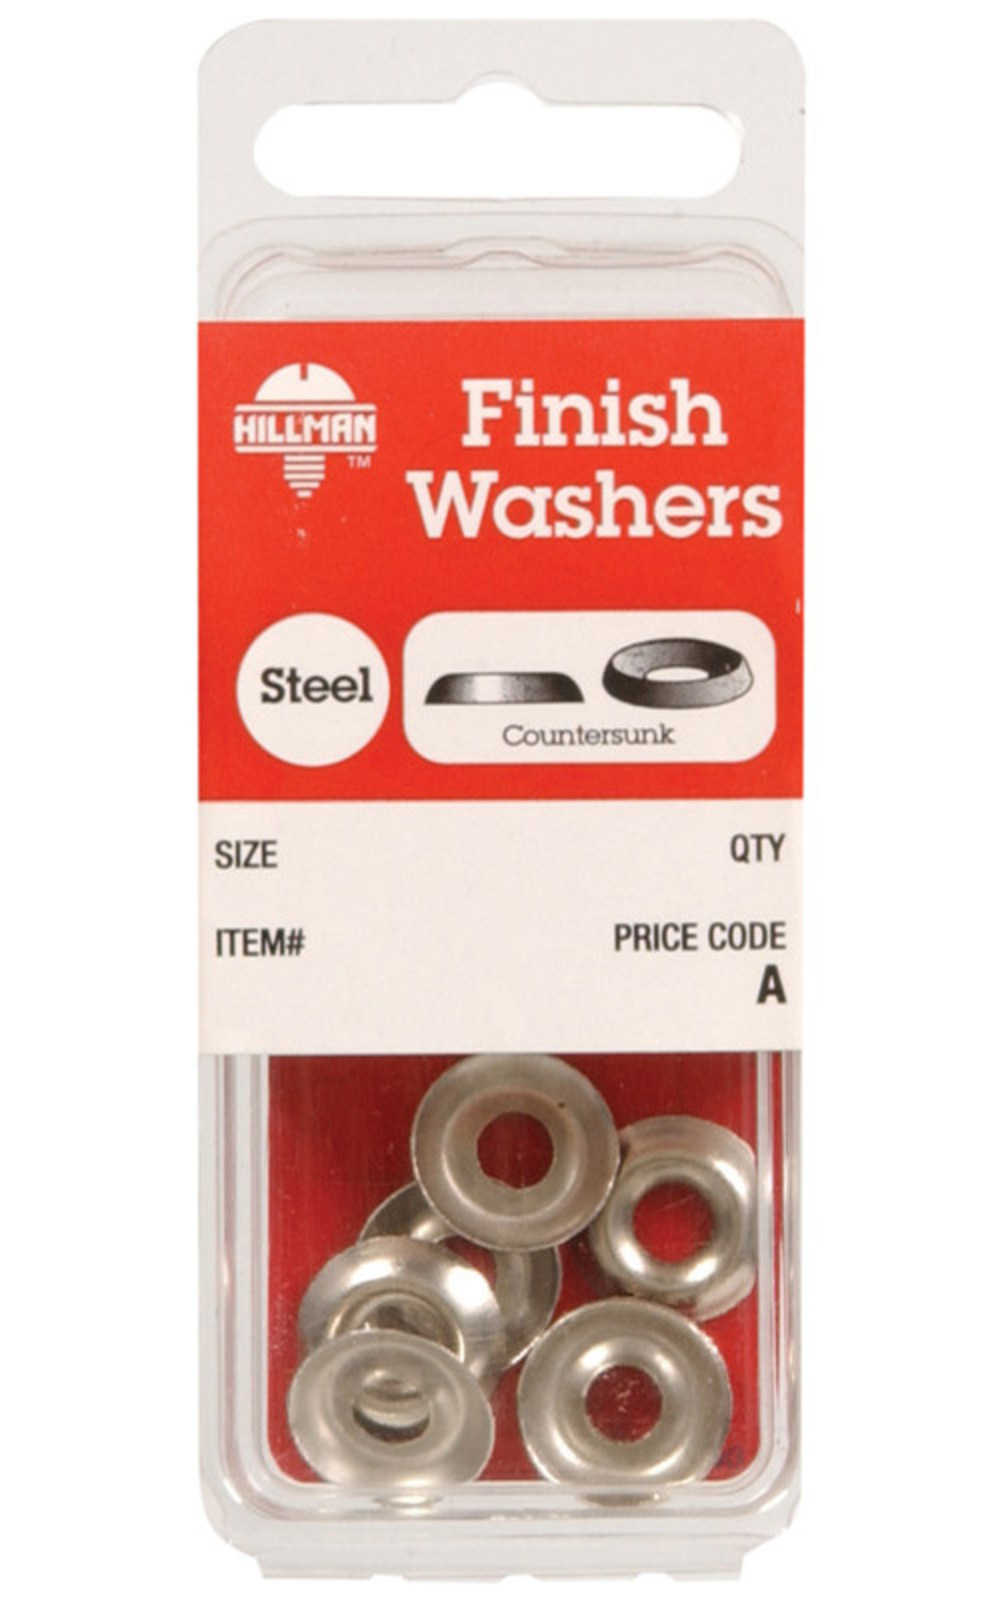 Hillman #6 Steel Nickel Plated Finishing Washer (10 Ct.) 6670 - image 2 of 2